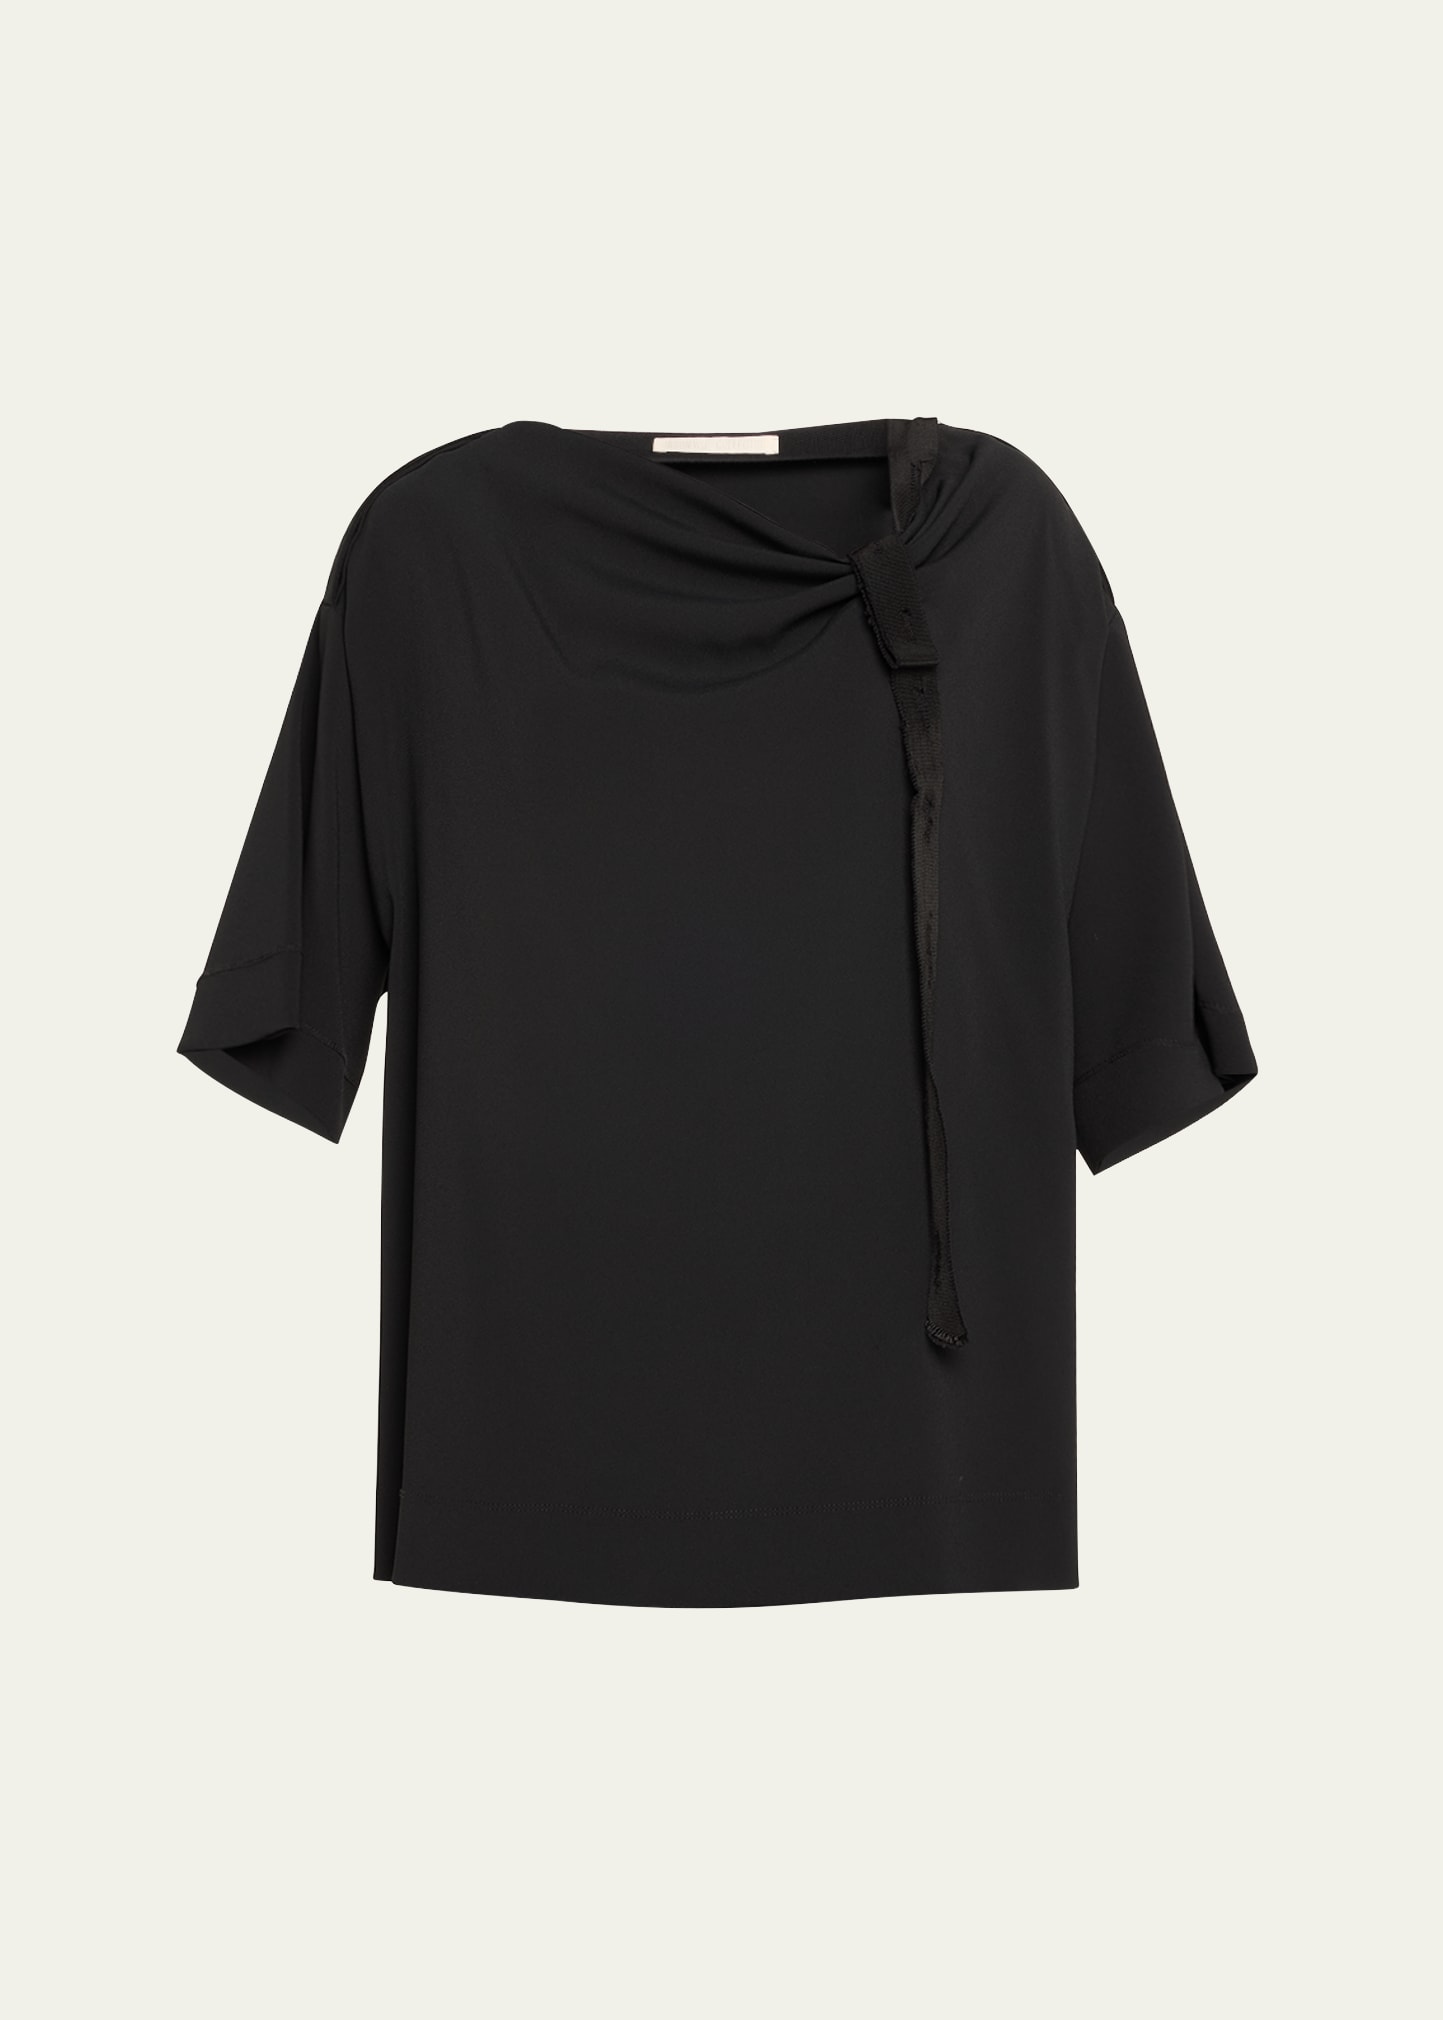 Draped Boatneck Top with Tie Detail